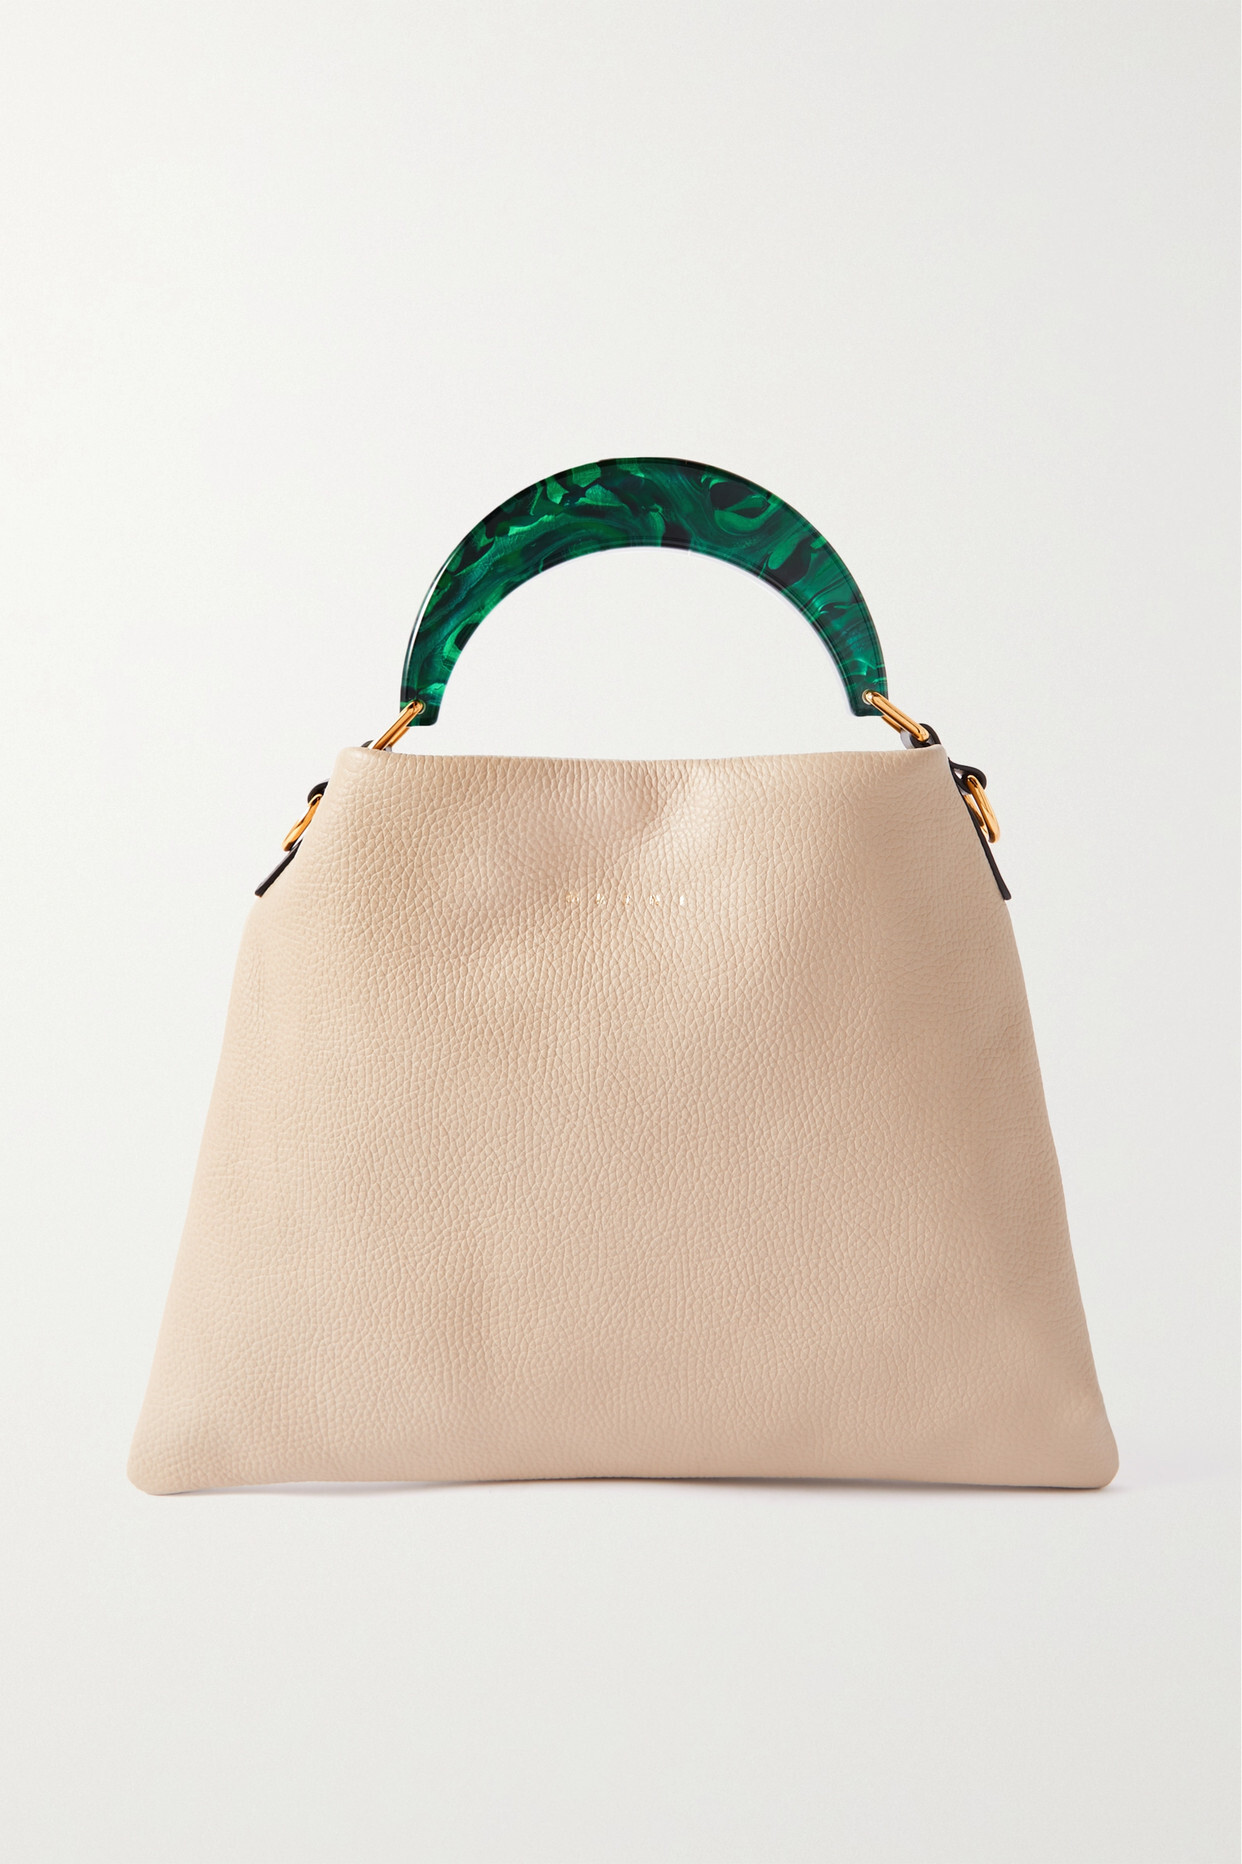 Marni - Venice Small Marbled Resin And Textured-leather Tote - Cream